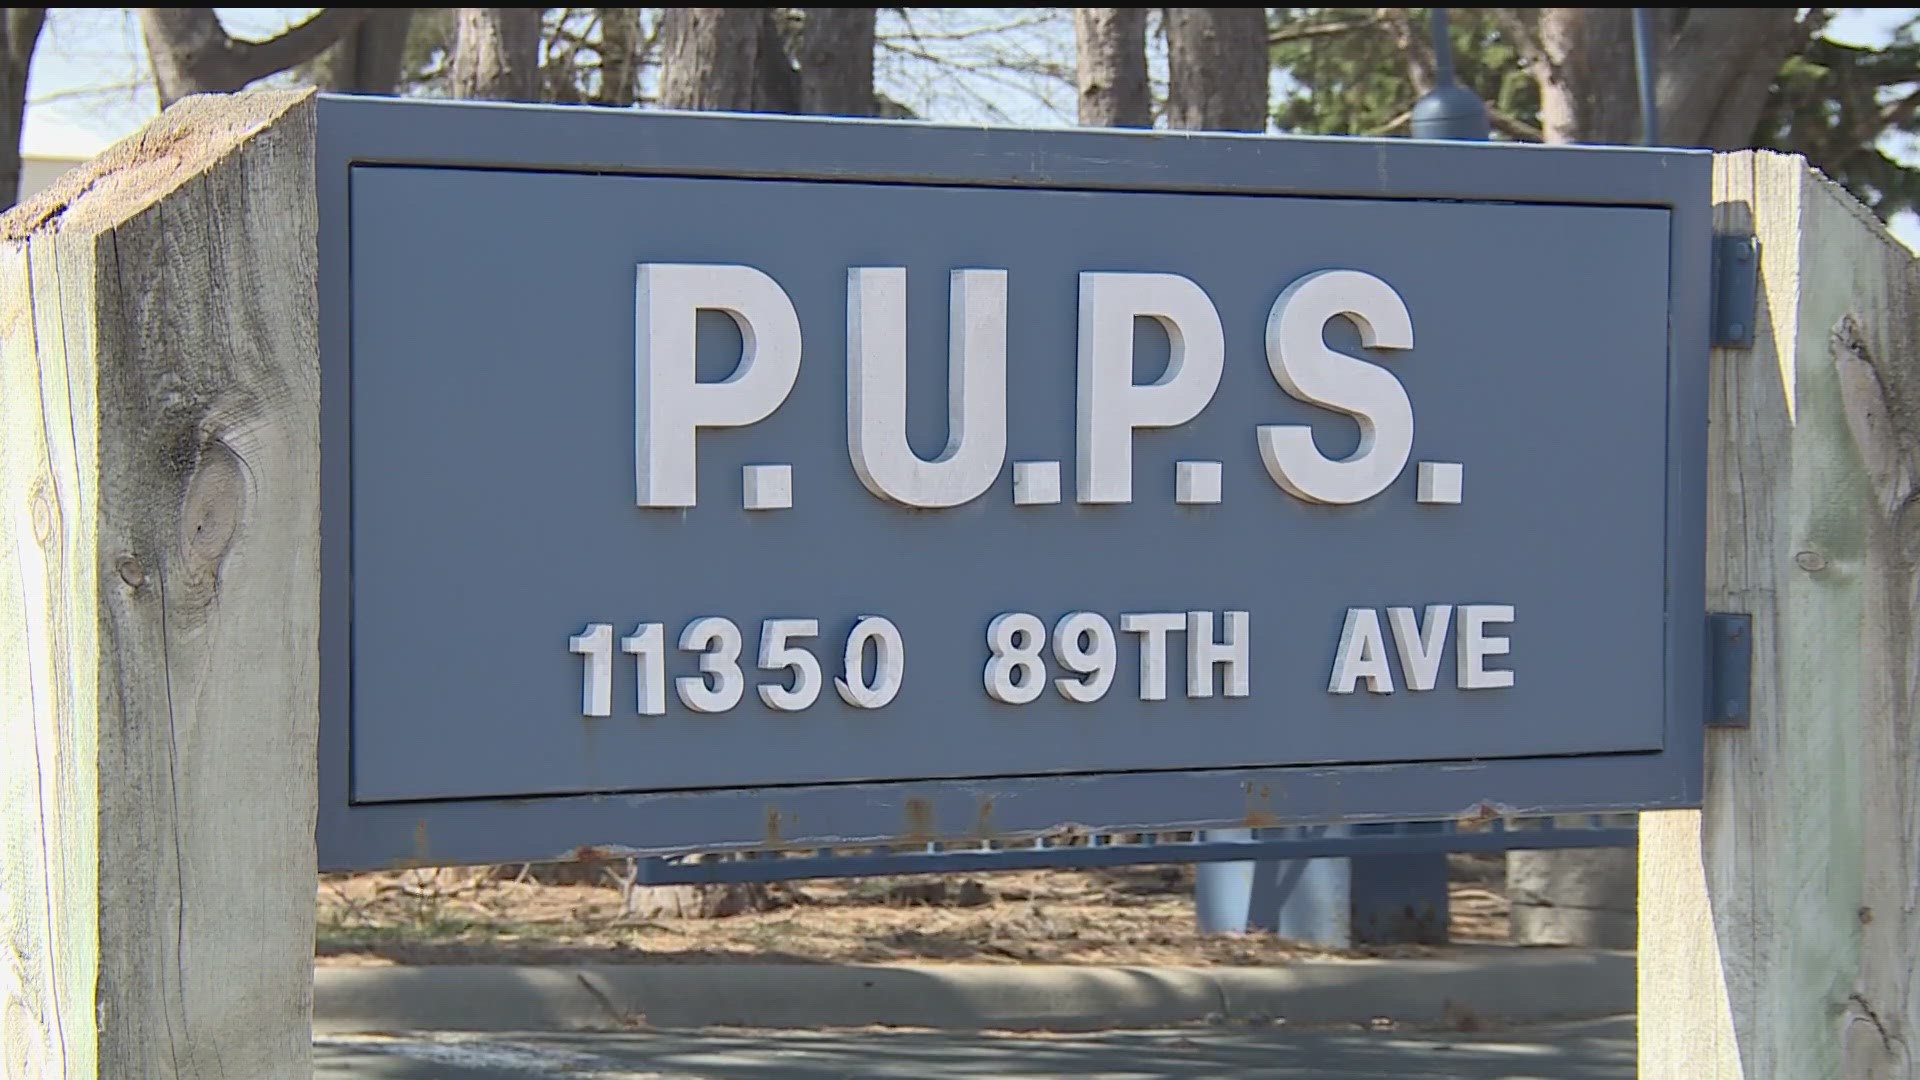 Police say the victim, a 22-year-old man, was attacked at his home by four Pit Bull Terriers he was watching for a family member.